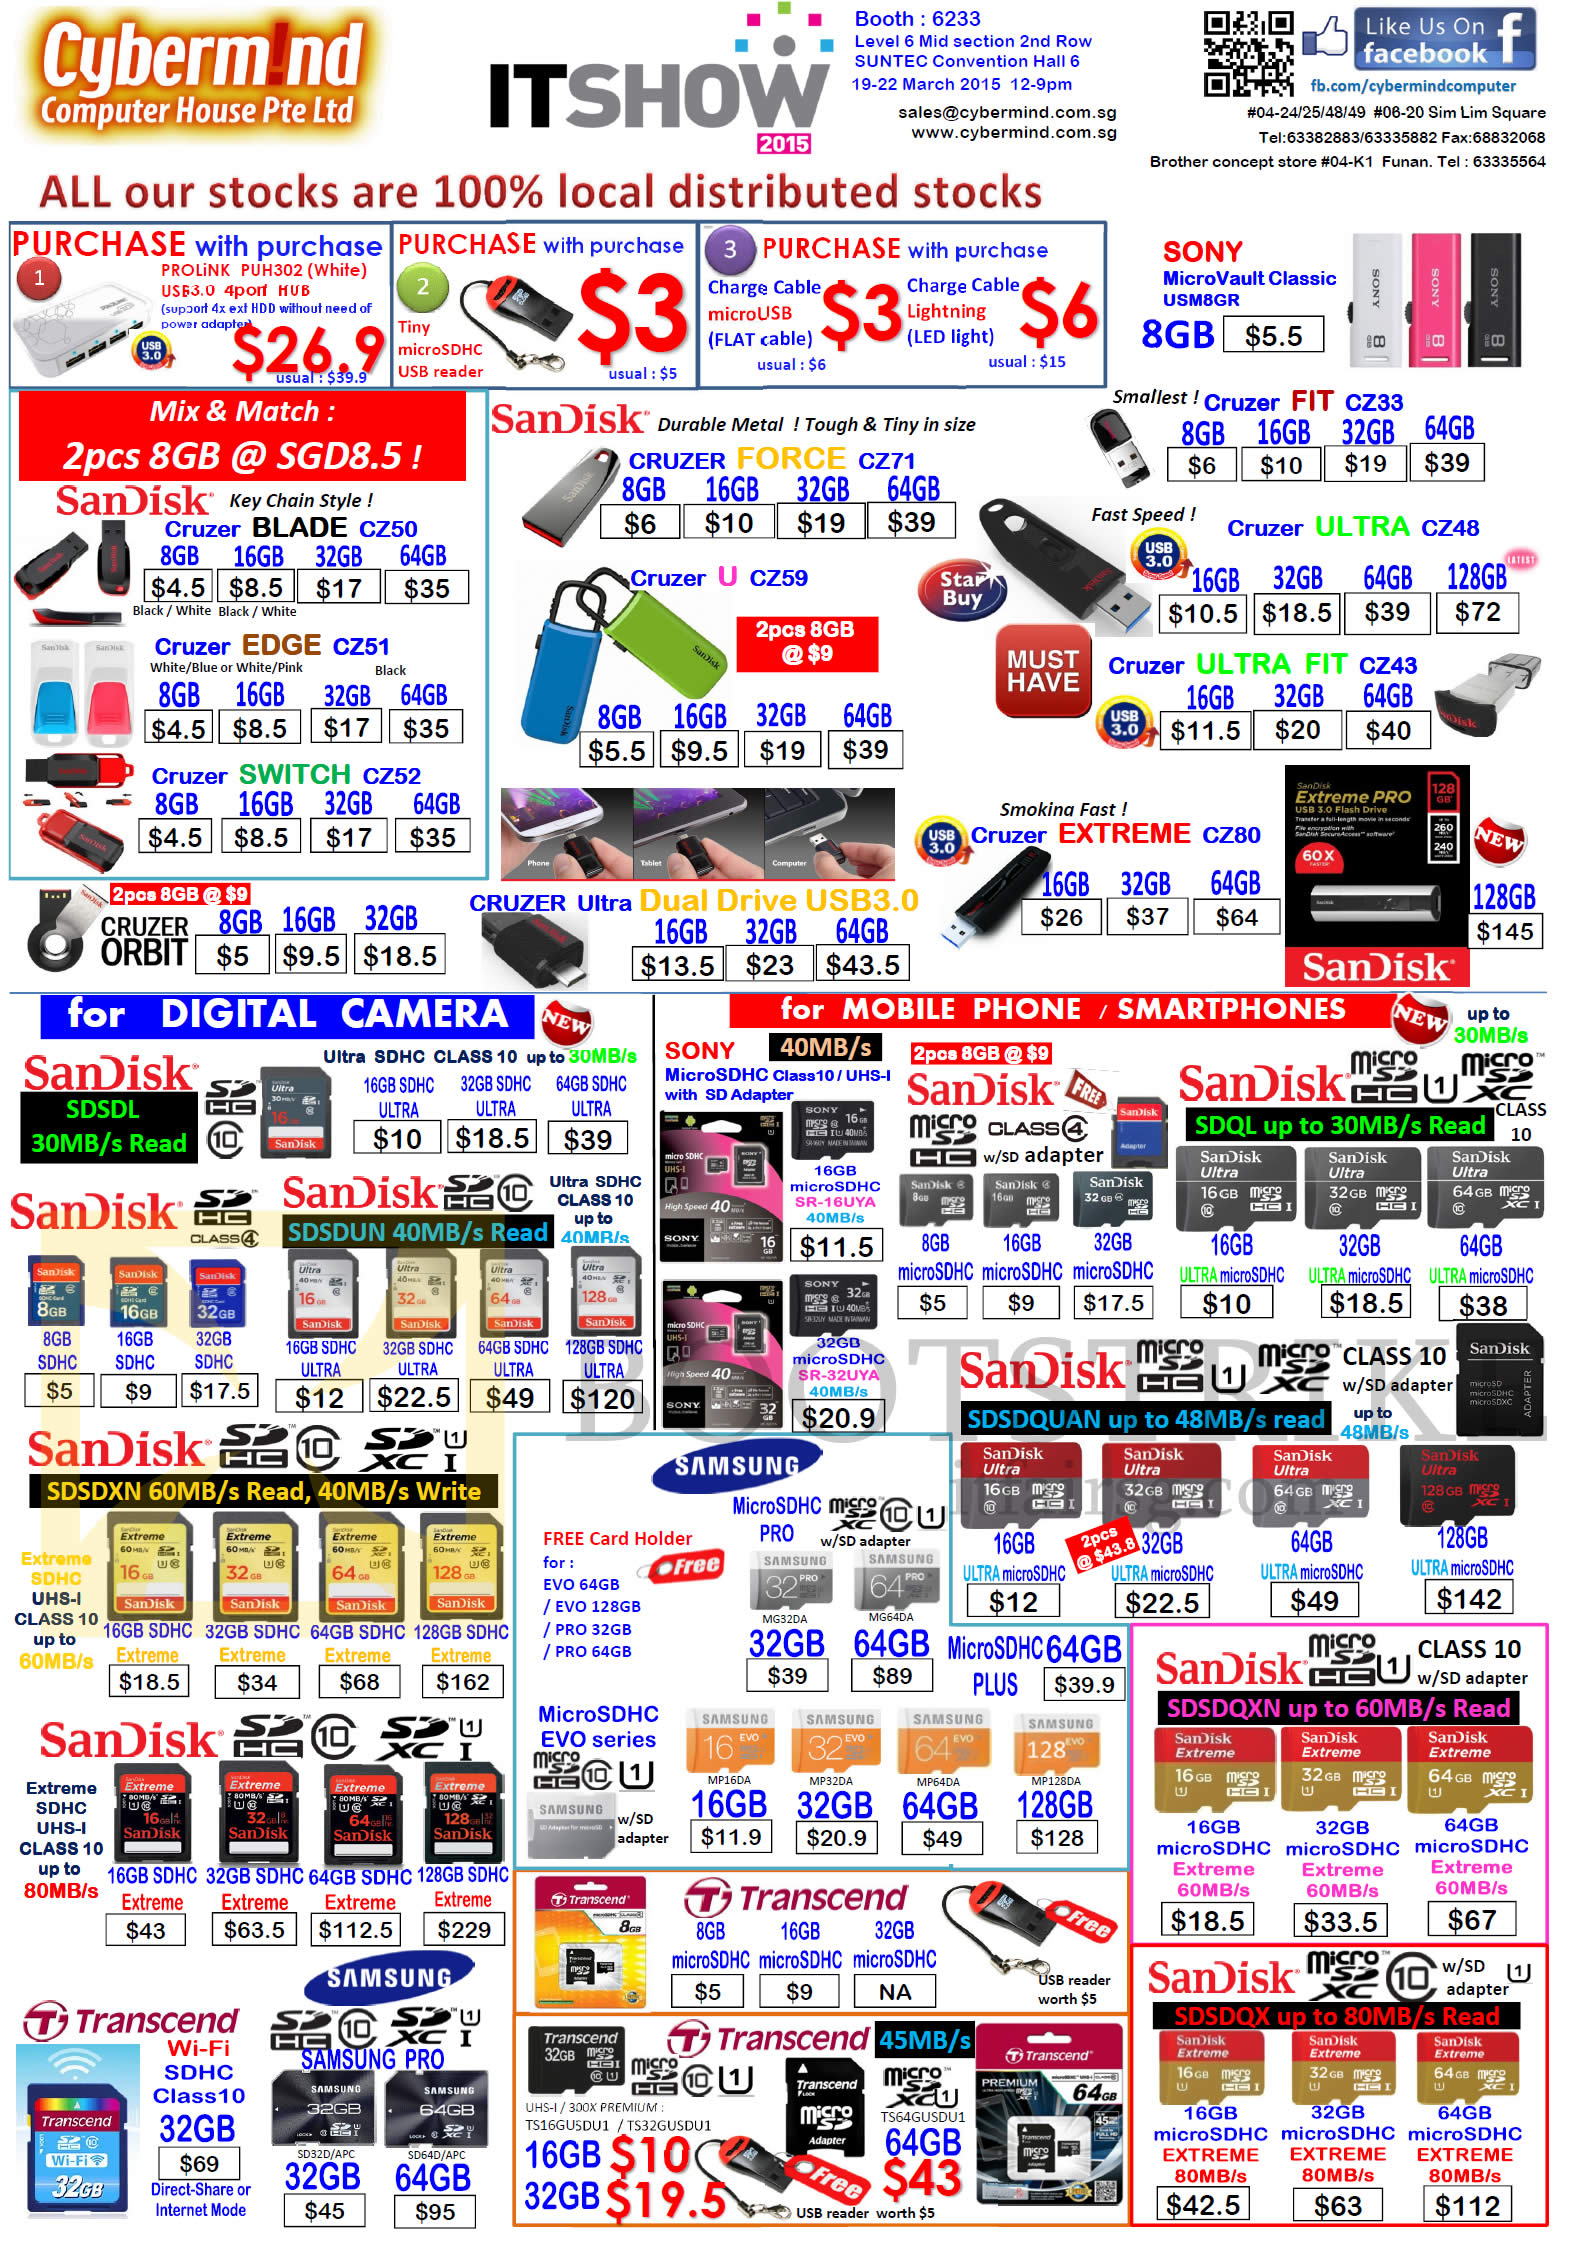 IT SHOW 2015 price list image brochure of Cybermind Flash Drives, SDHC Cards, SanDisk Extreme, Sony, Transcend, Samsung, Sony, Cruzer, Micro Vault, MicroSDHC